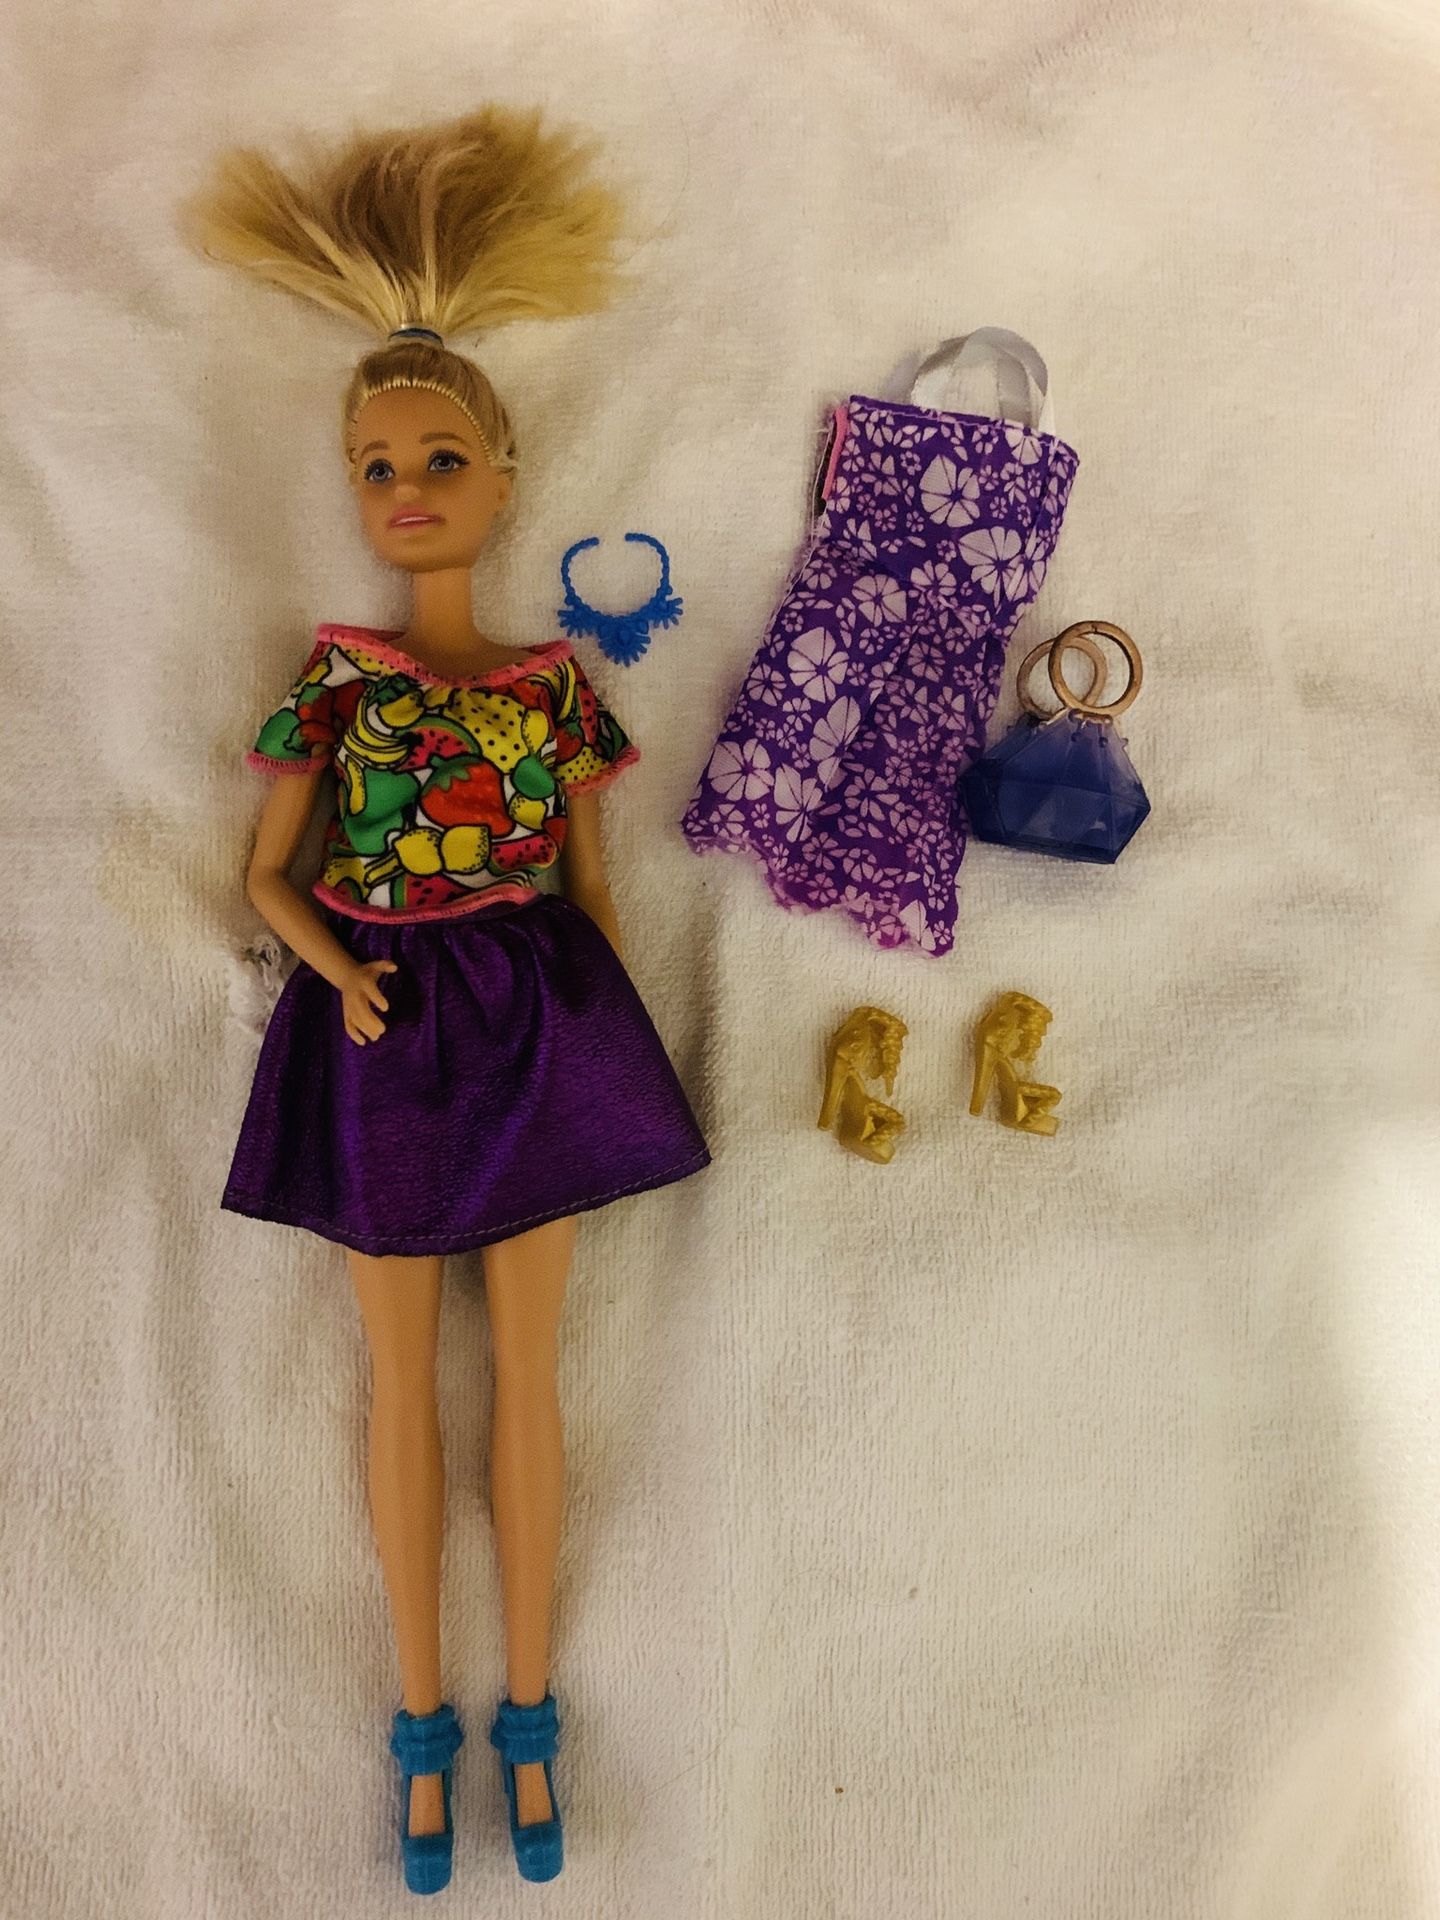 Barbie and accessories